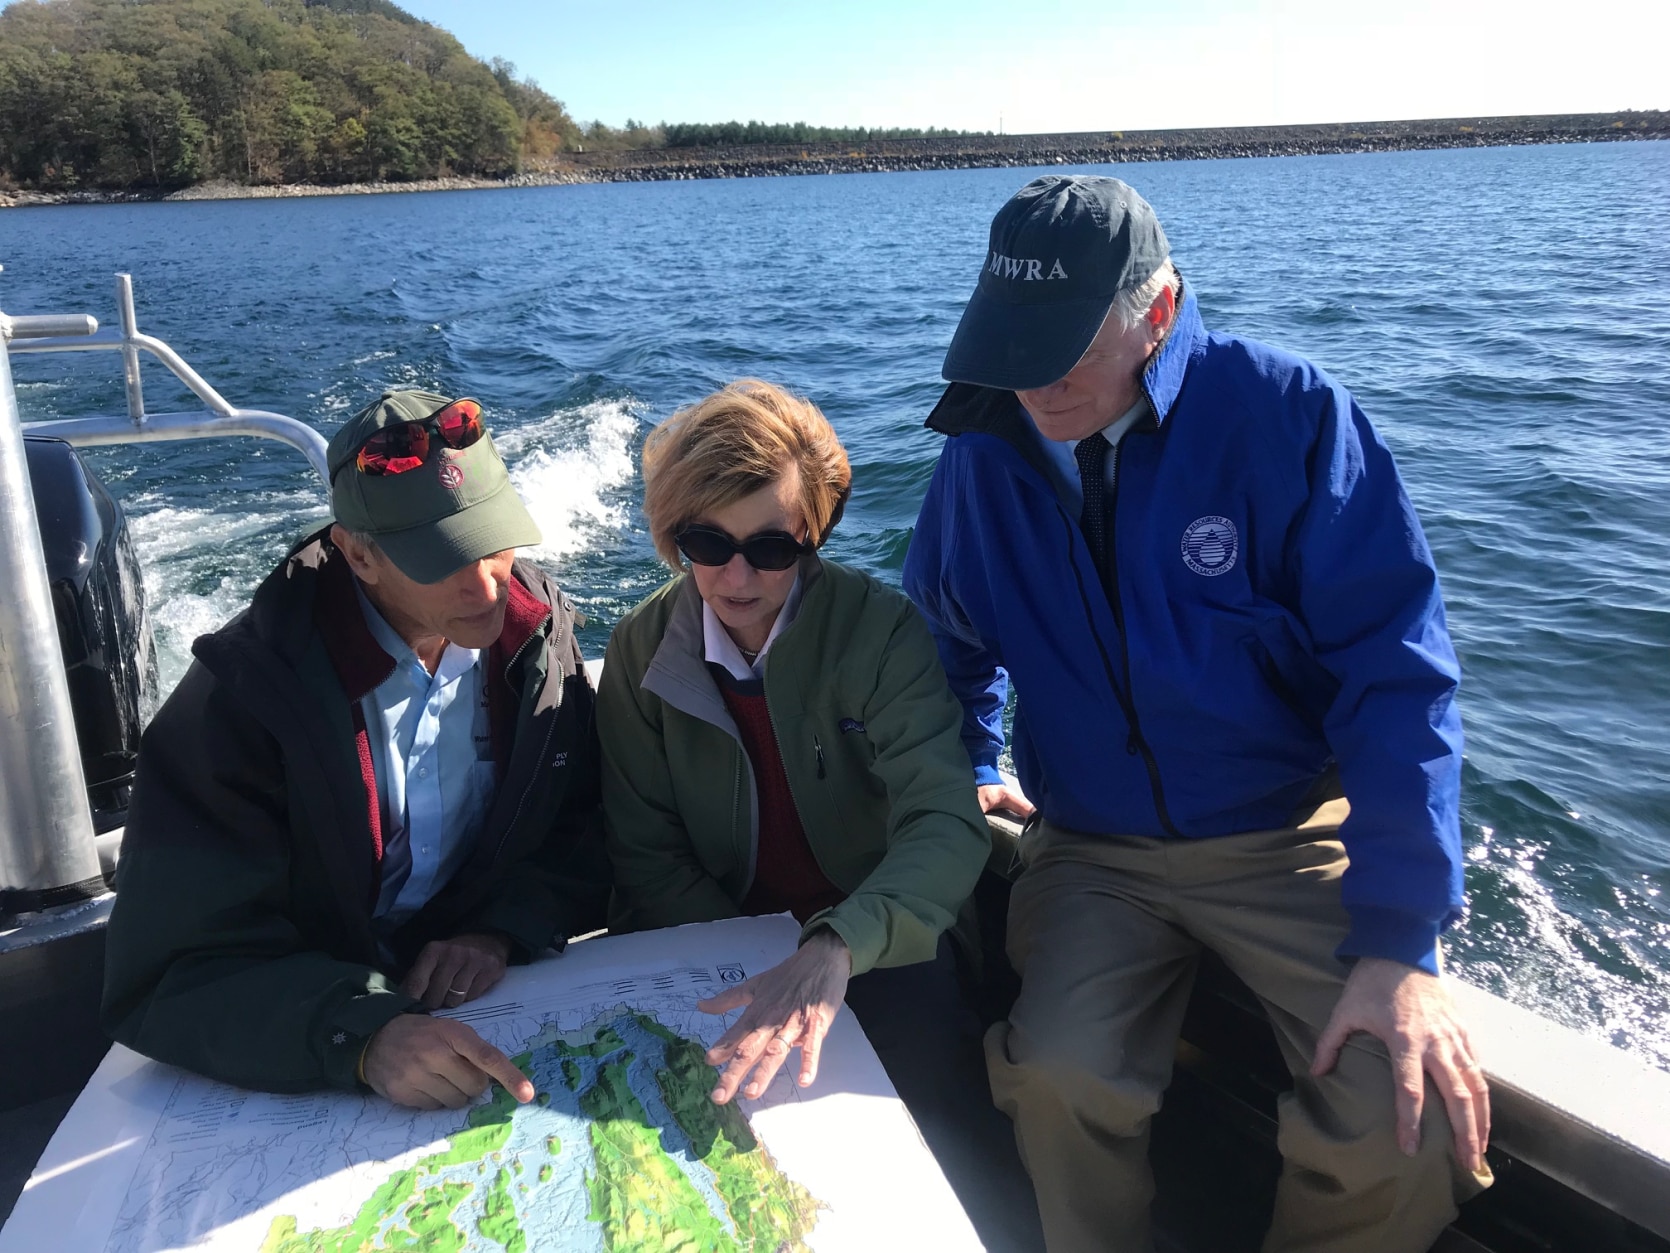 State Auditor Suzanne M. Bump (center) on a boat tour of the Quabbin Reservoir with Fred Laskey (right), Executive Director of the Massachusetts Water Resources Authority and Clif Read (left) of the Massachusetts Department of Conservation and Recreation.